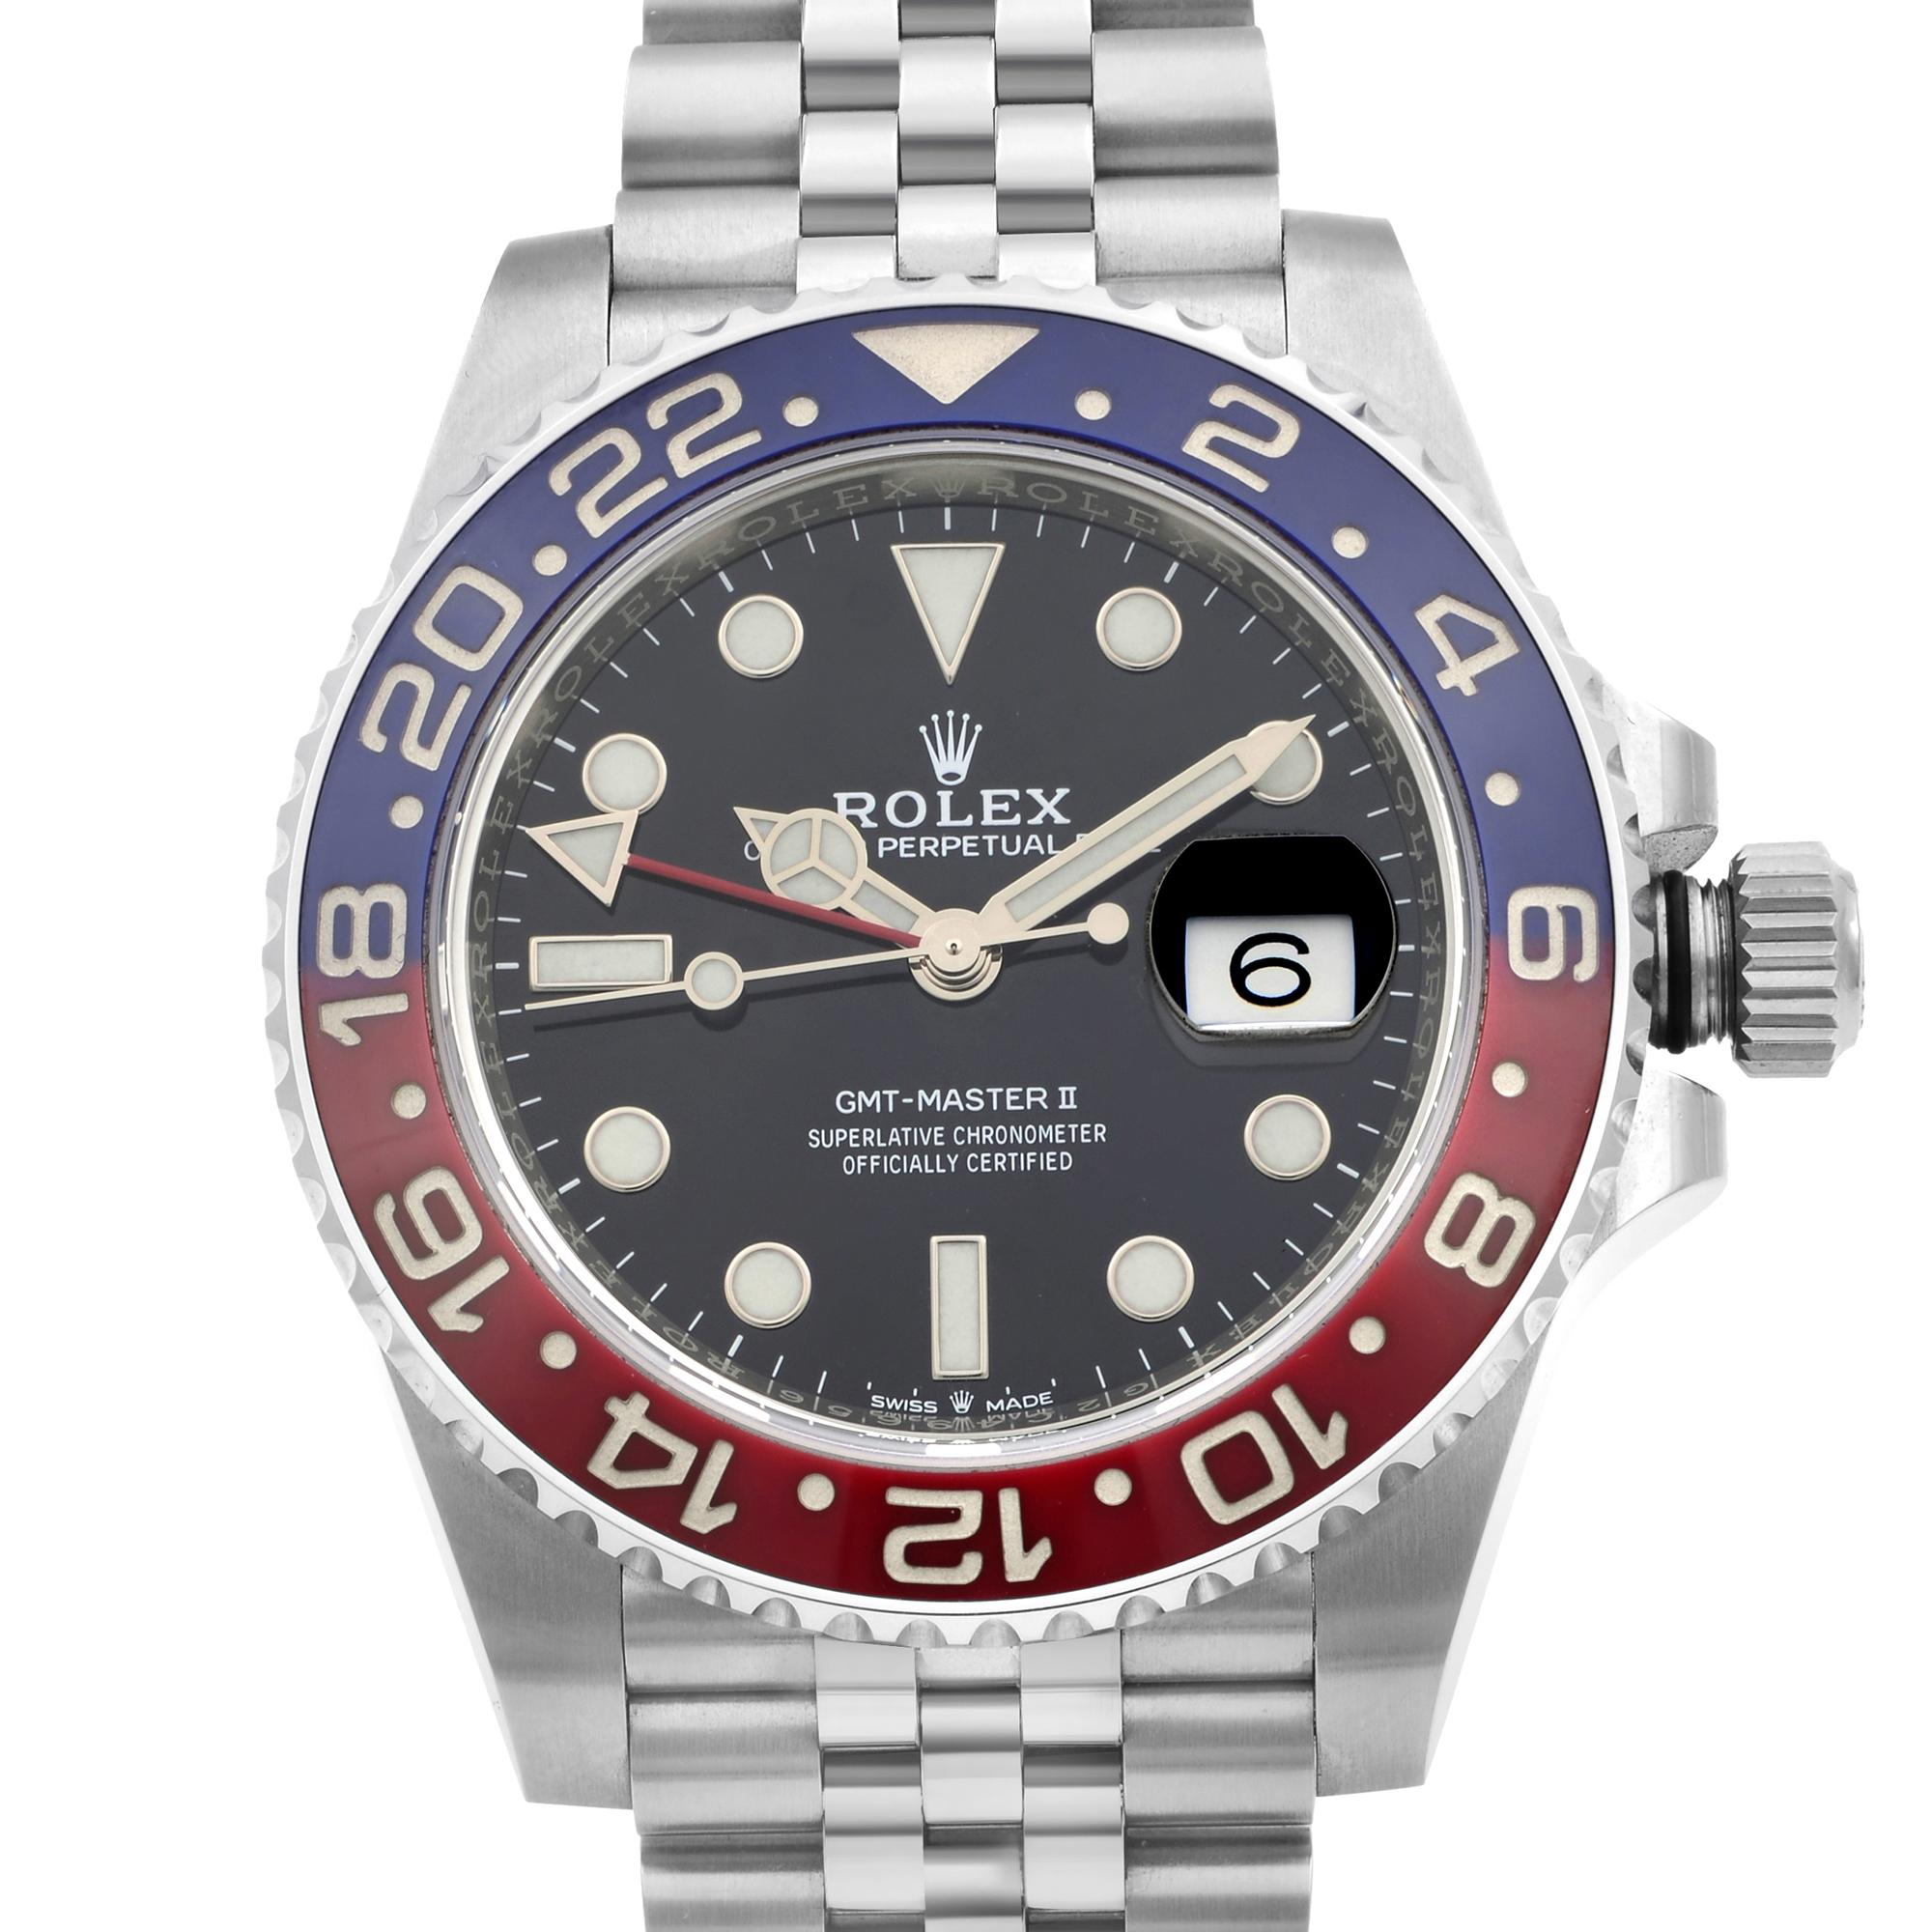 Unworn. Comes with an original box and papers.


Watch Details:

Brand: Rolex
Department: Men
Model Number: 126710BLRO
Country/Region of Manufacture: Switzerland
Model: Rolex GMT-Master II 126710BLRO
Style: Dress/Formal, Luxury
Movement: Mechanical